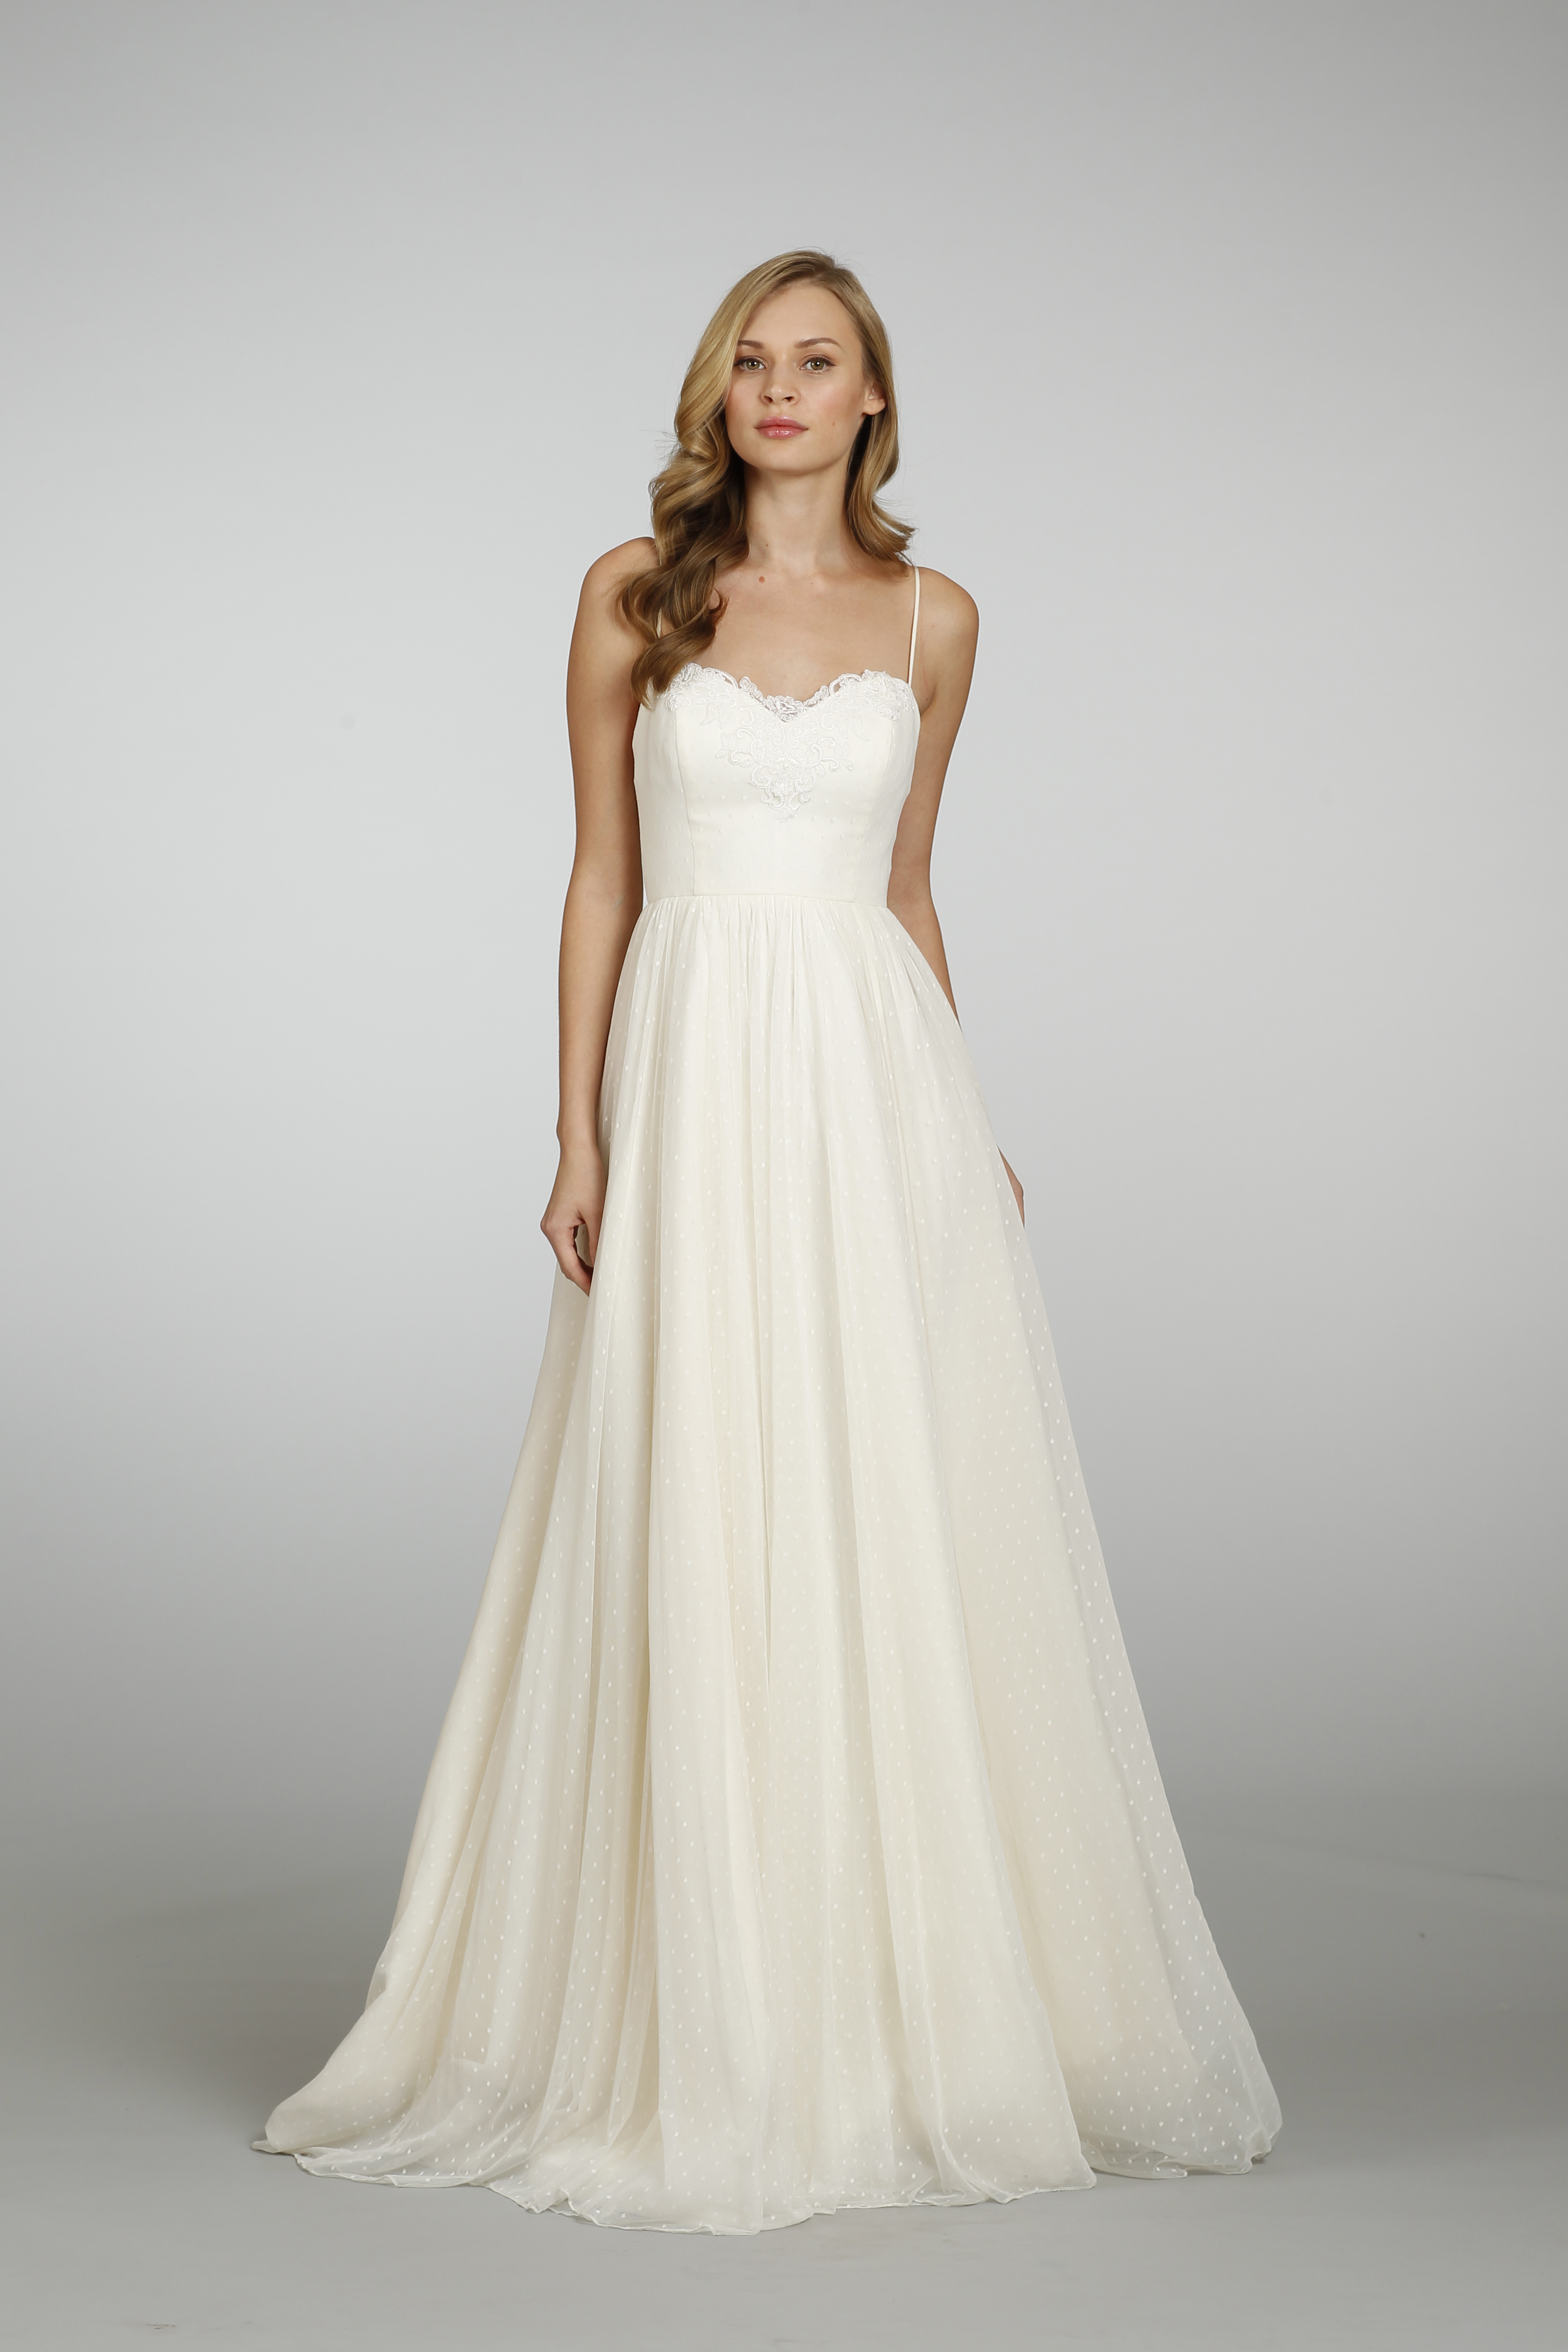 Perfect Wedding Dress for the Rectangle Shaped Bride